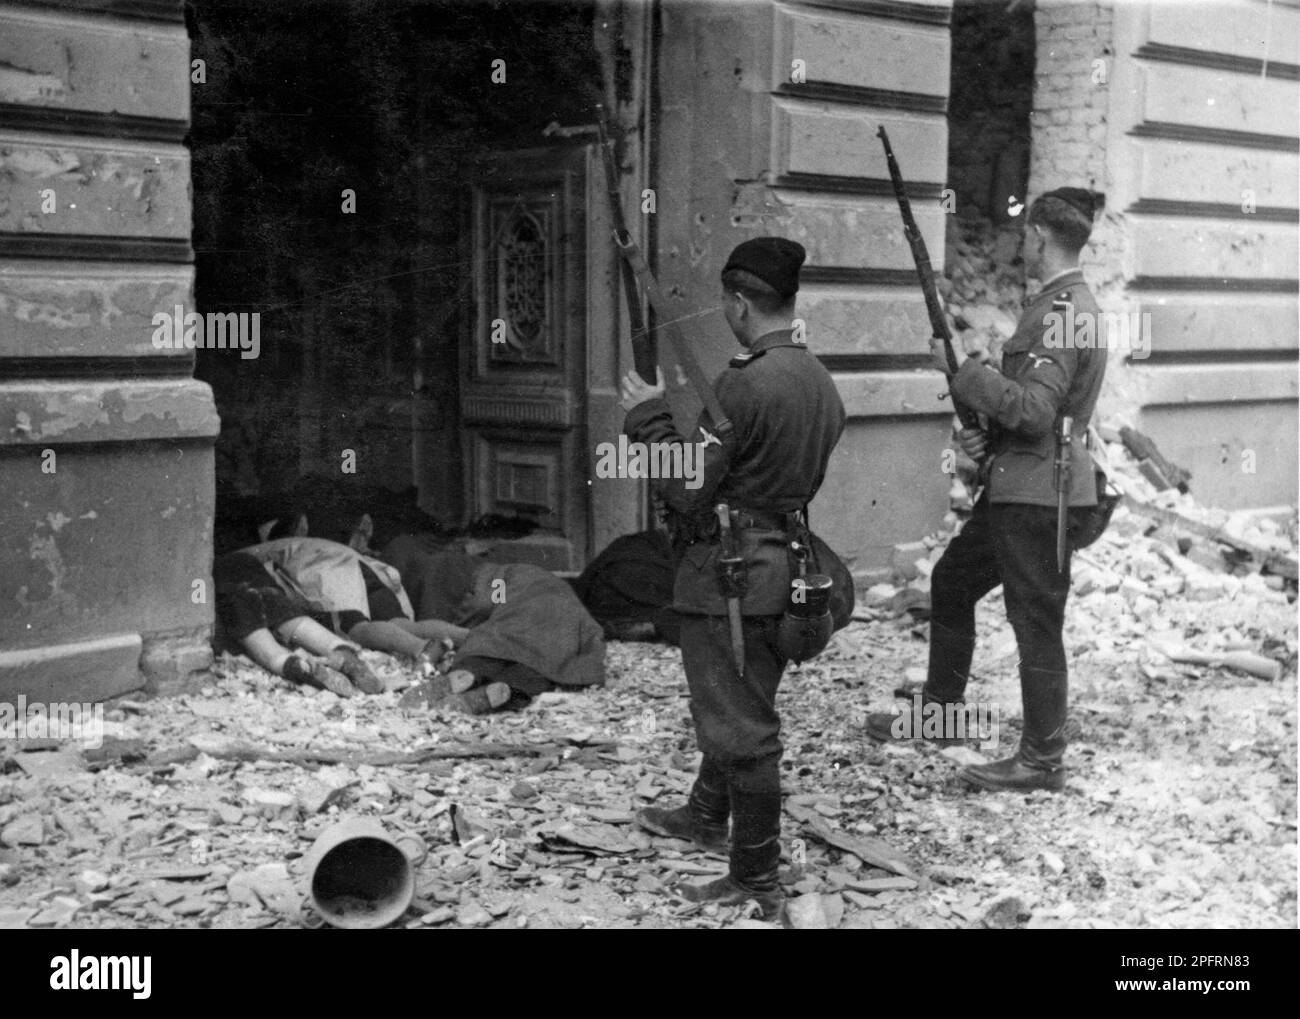 In January 1943 the nazis arrived to round up the Jews of the Warsaw Ghetto  The Jews, resolved to fight it out, took on the SS with homemade and primitive weapons. The defenders were executed or deported and the Ghetto area was systematically demolished. This event is known as The Ghetto Uprising.. This image shows the bodies of Jews executed after their capture. This image is from the German photographic record of the event, known as the Stroop report. Stock Photo